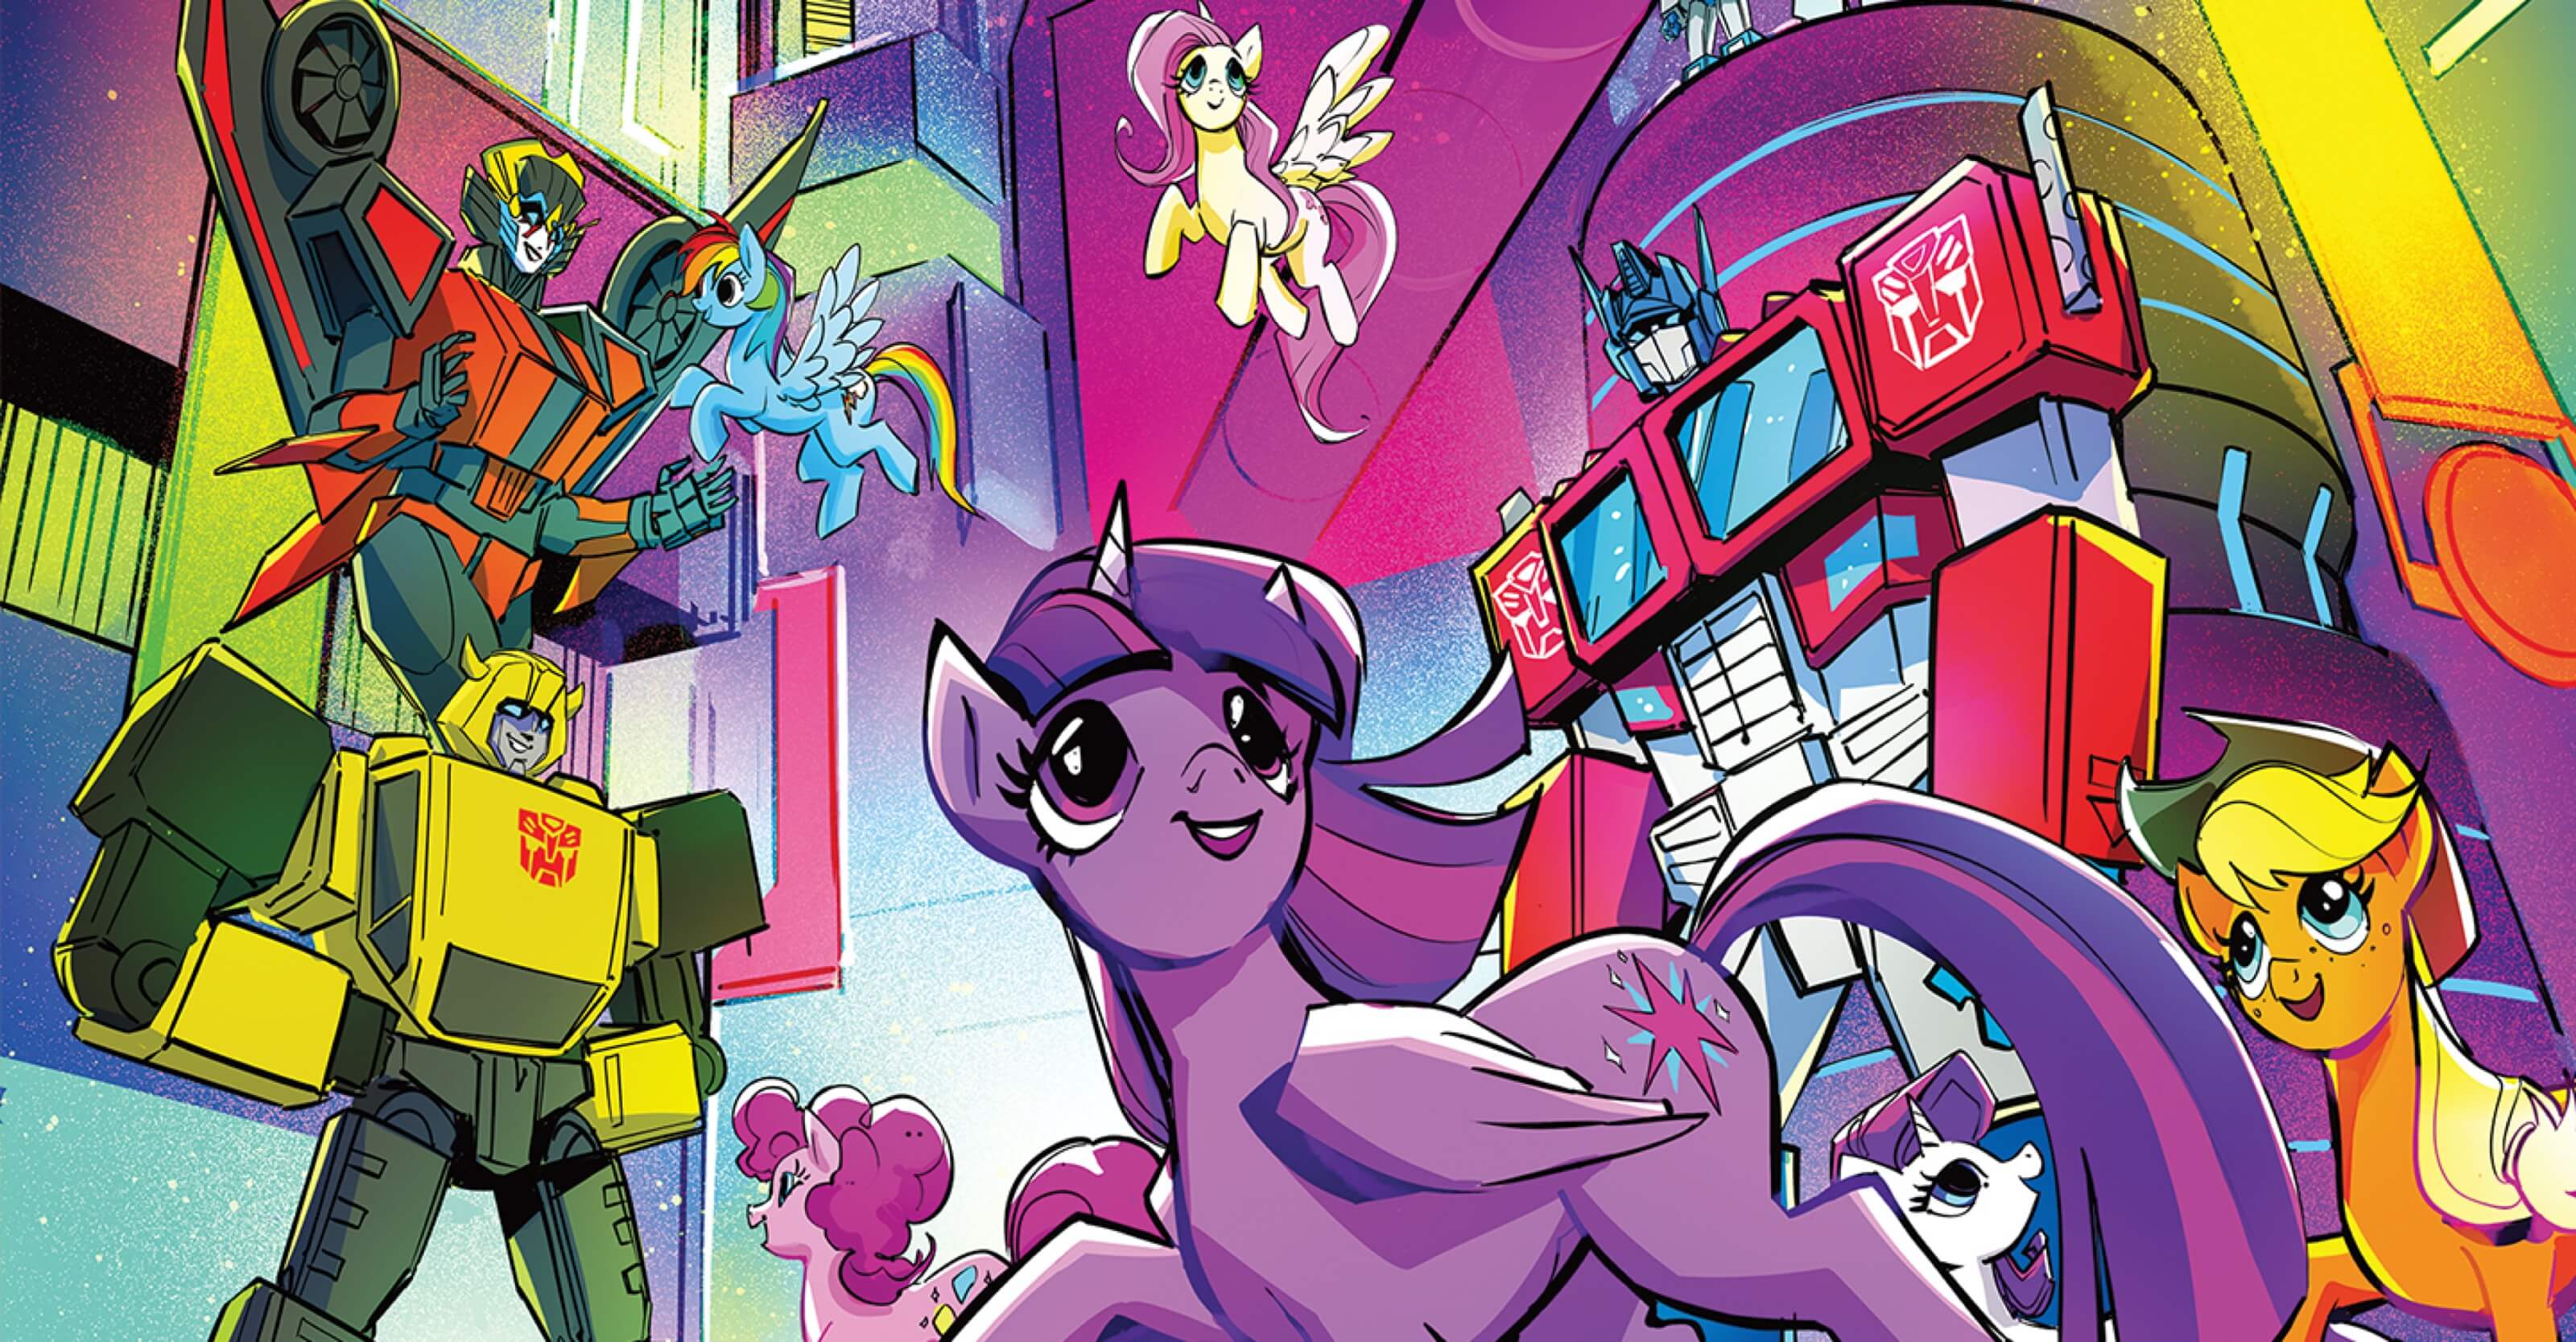 MY LITTLE PONY / TRANSFORMERS II Continues IDW’s Wild Crossover of Beloved Hasbro Brands